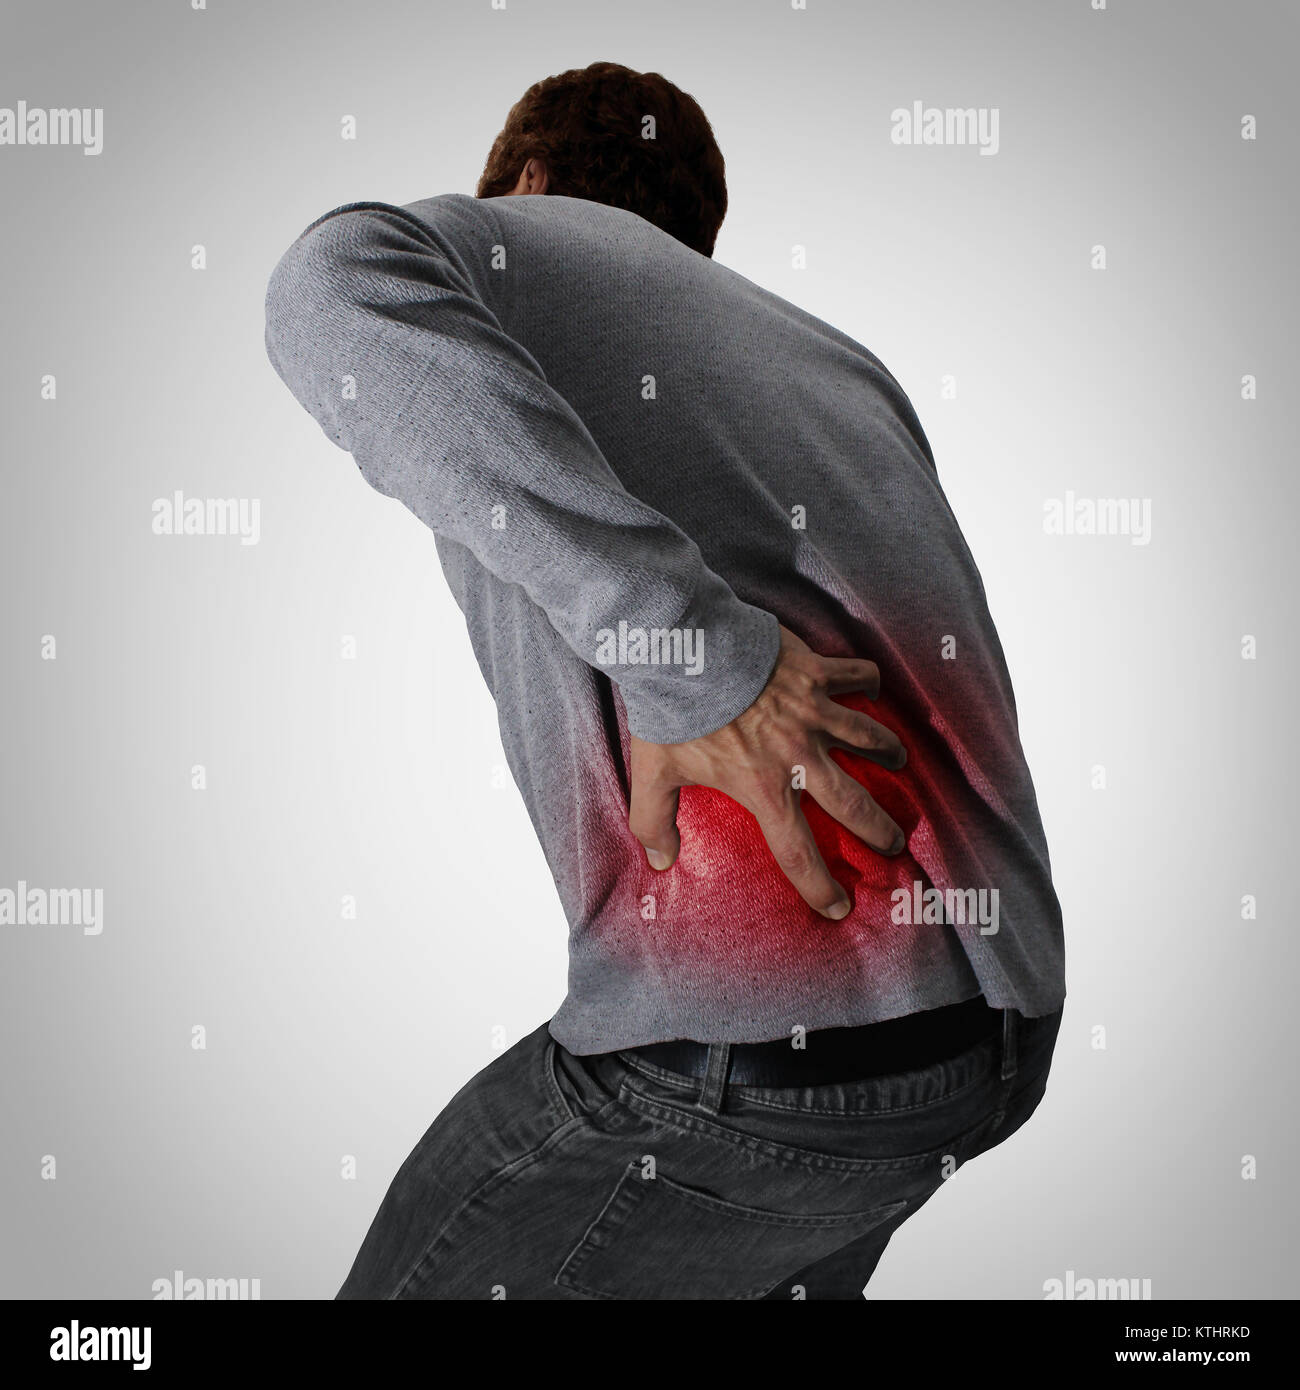 Muscle pain and painful back medical concept as a person with a spine injury or pulled muscles. Stock Photo